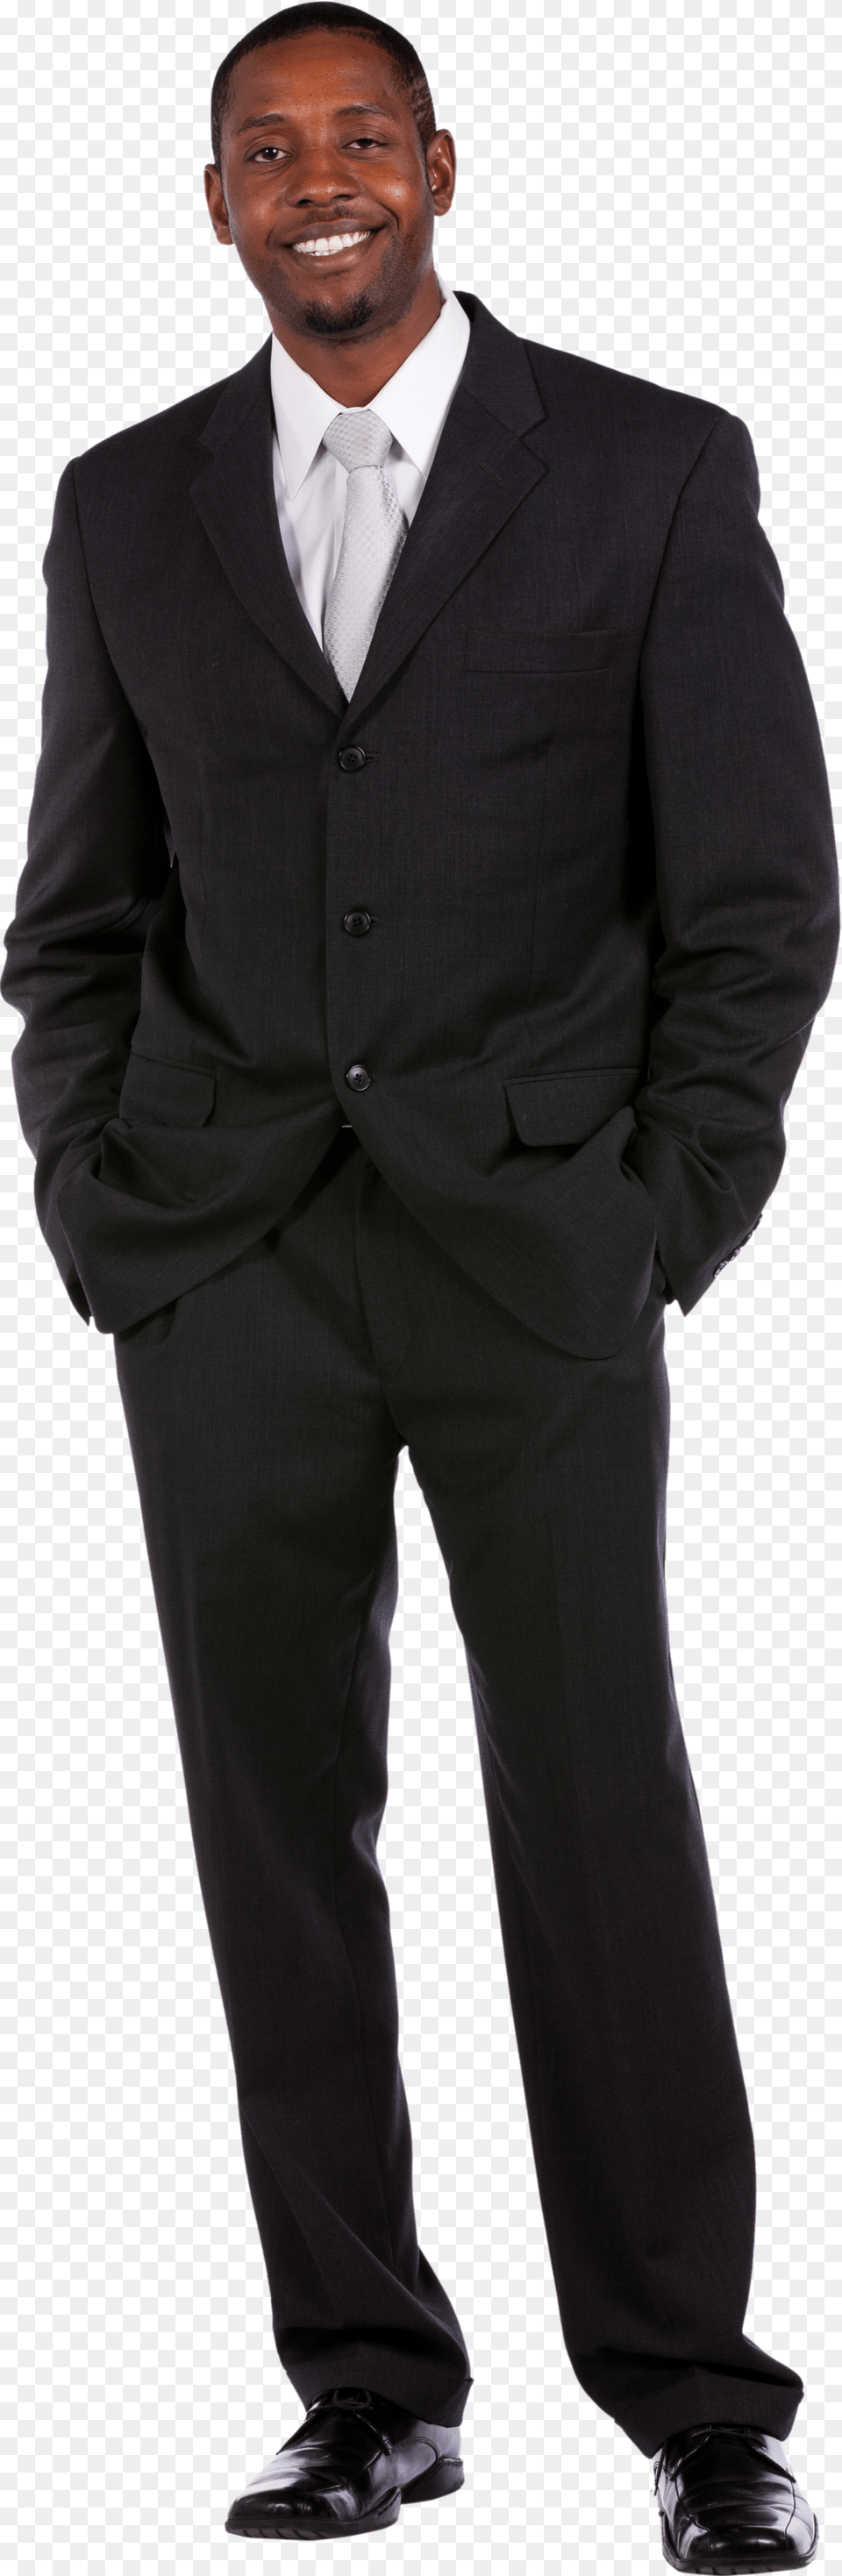 Tyrell People Cutout Image X Large Formal Wear, Tuxedo, Suit, Clothing, Formal Wear Png